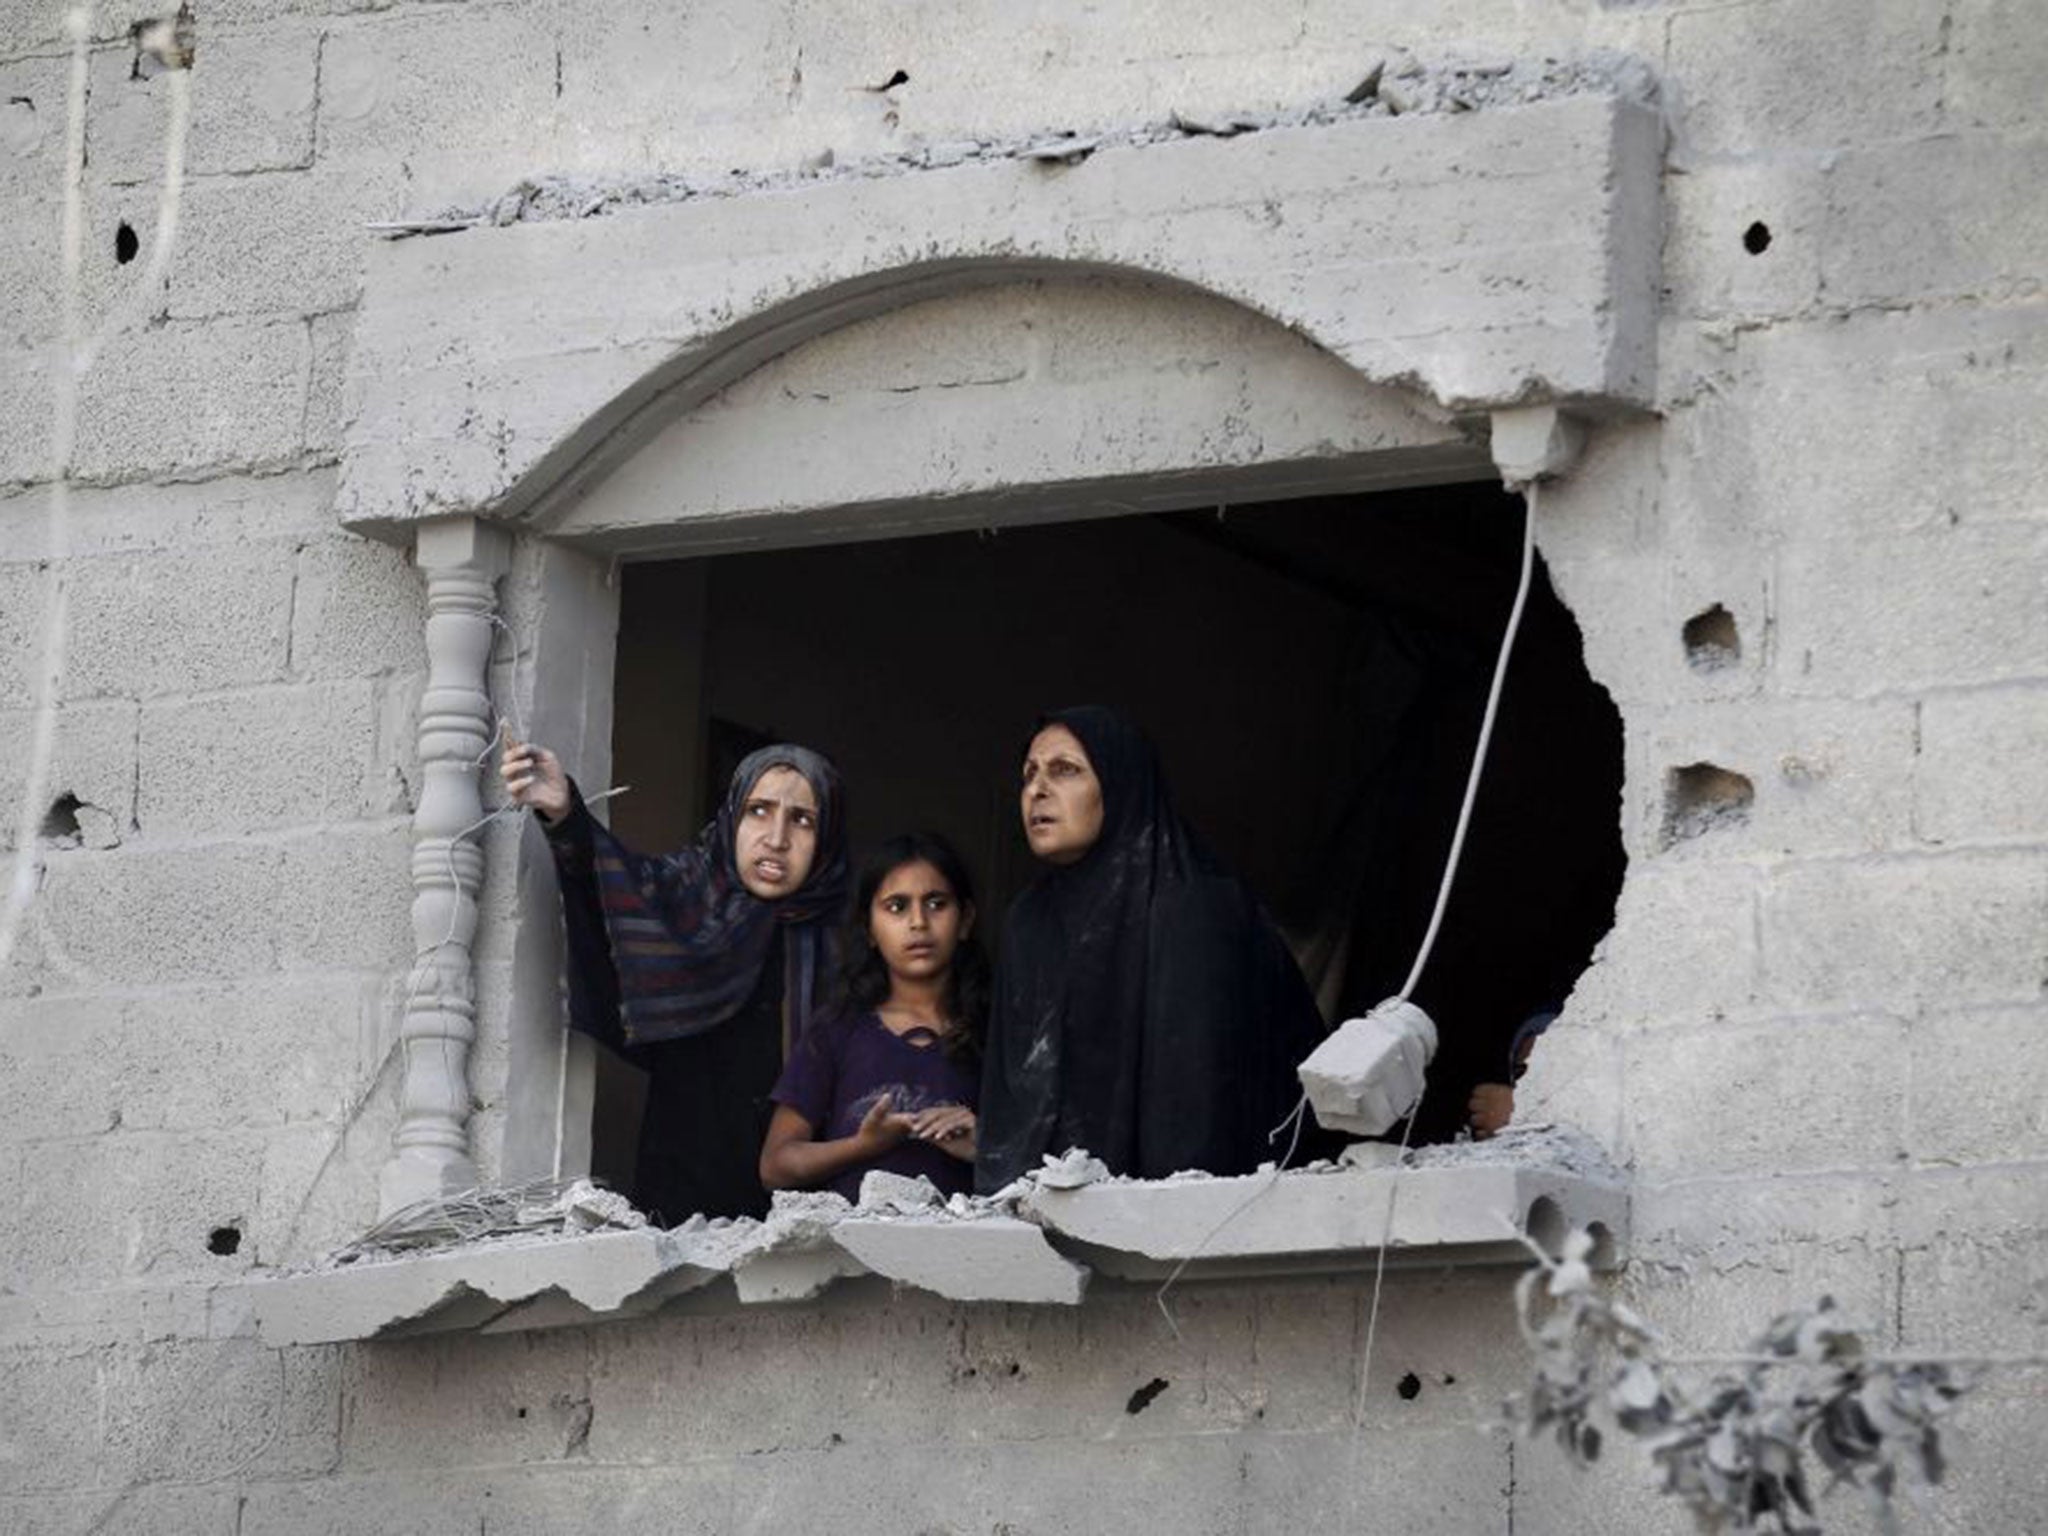 Palestinians observe the wreckage